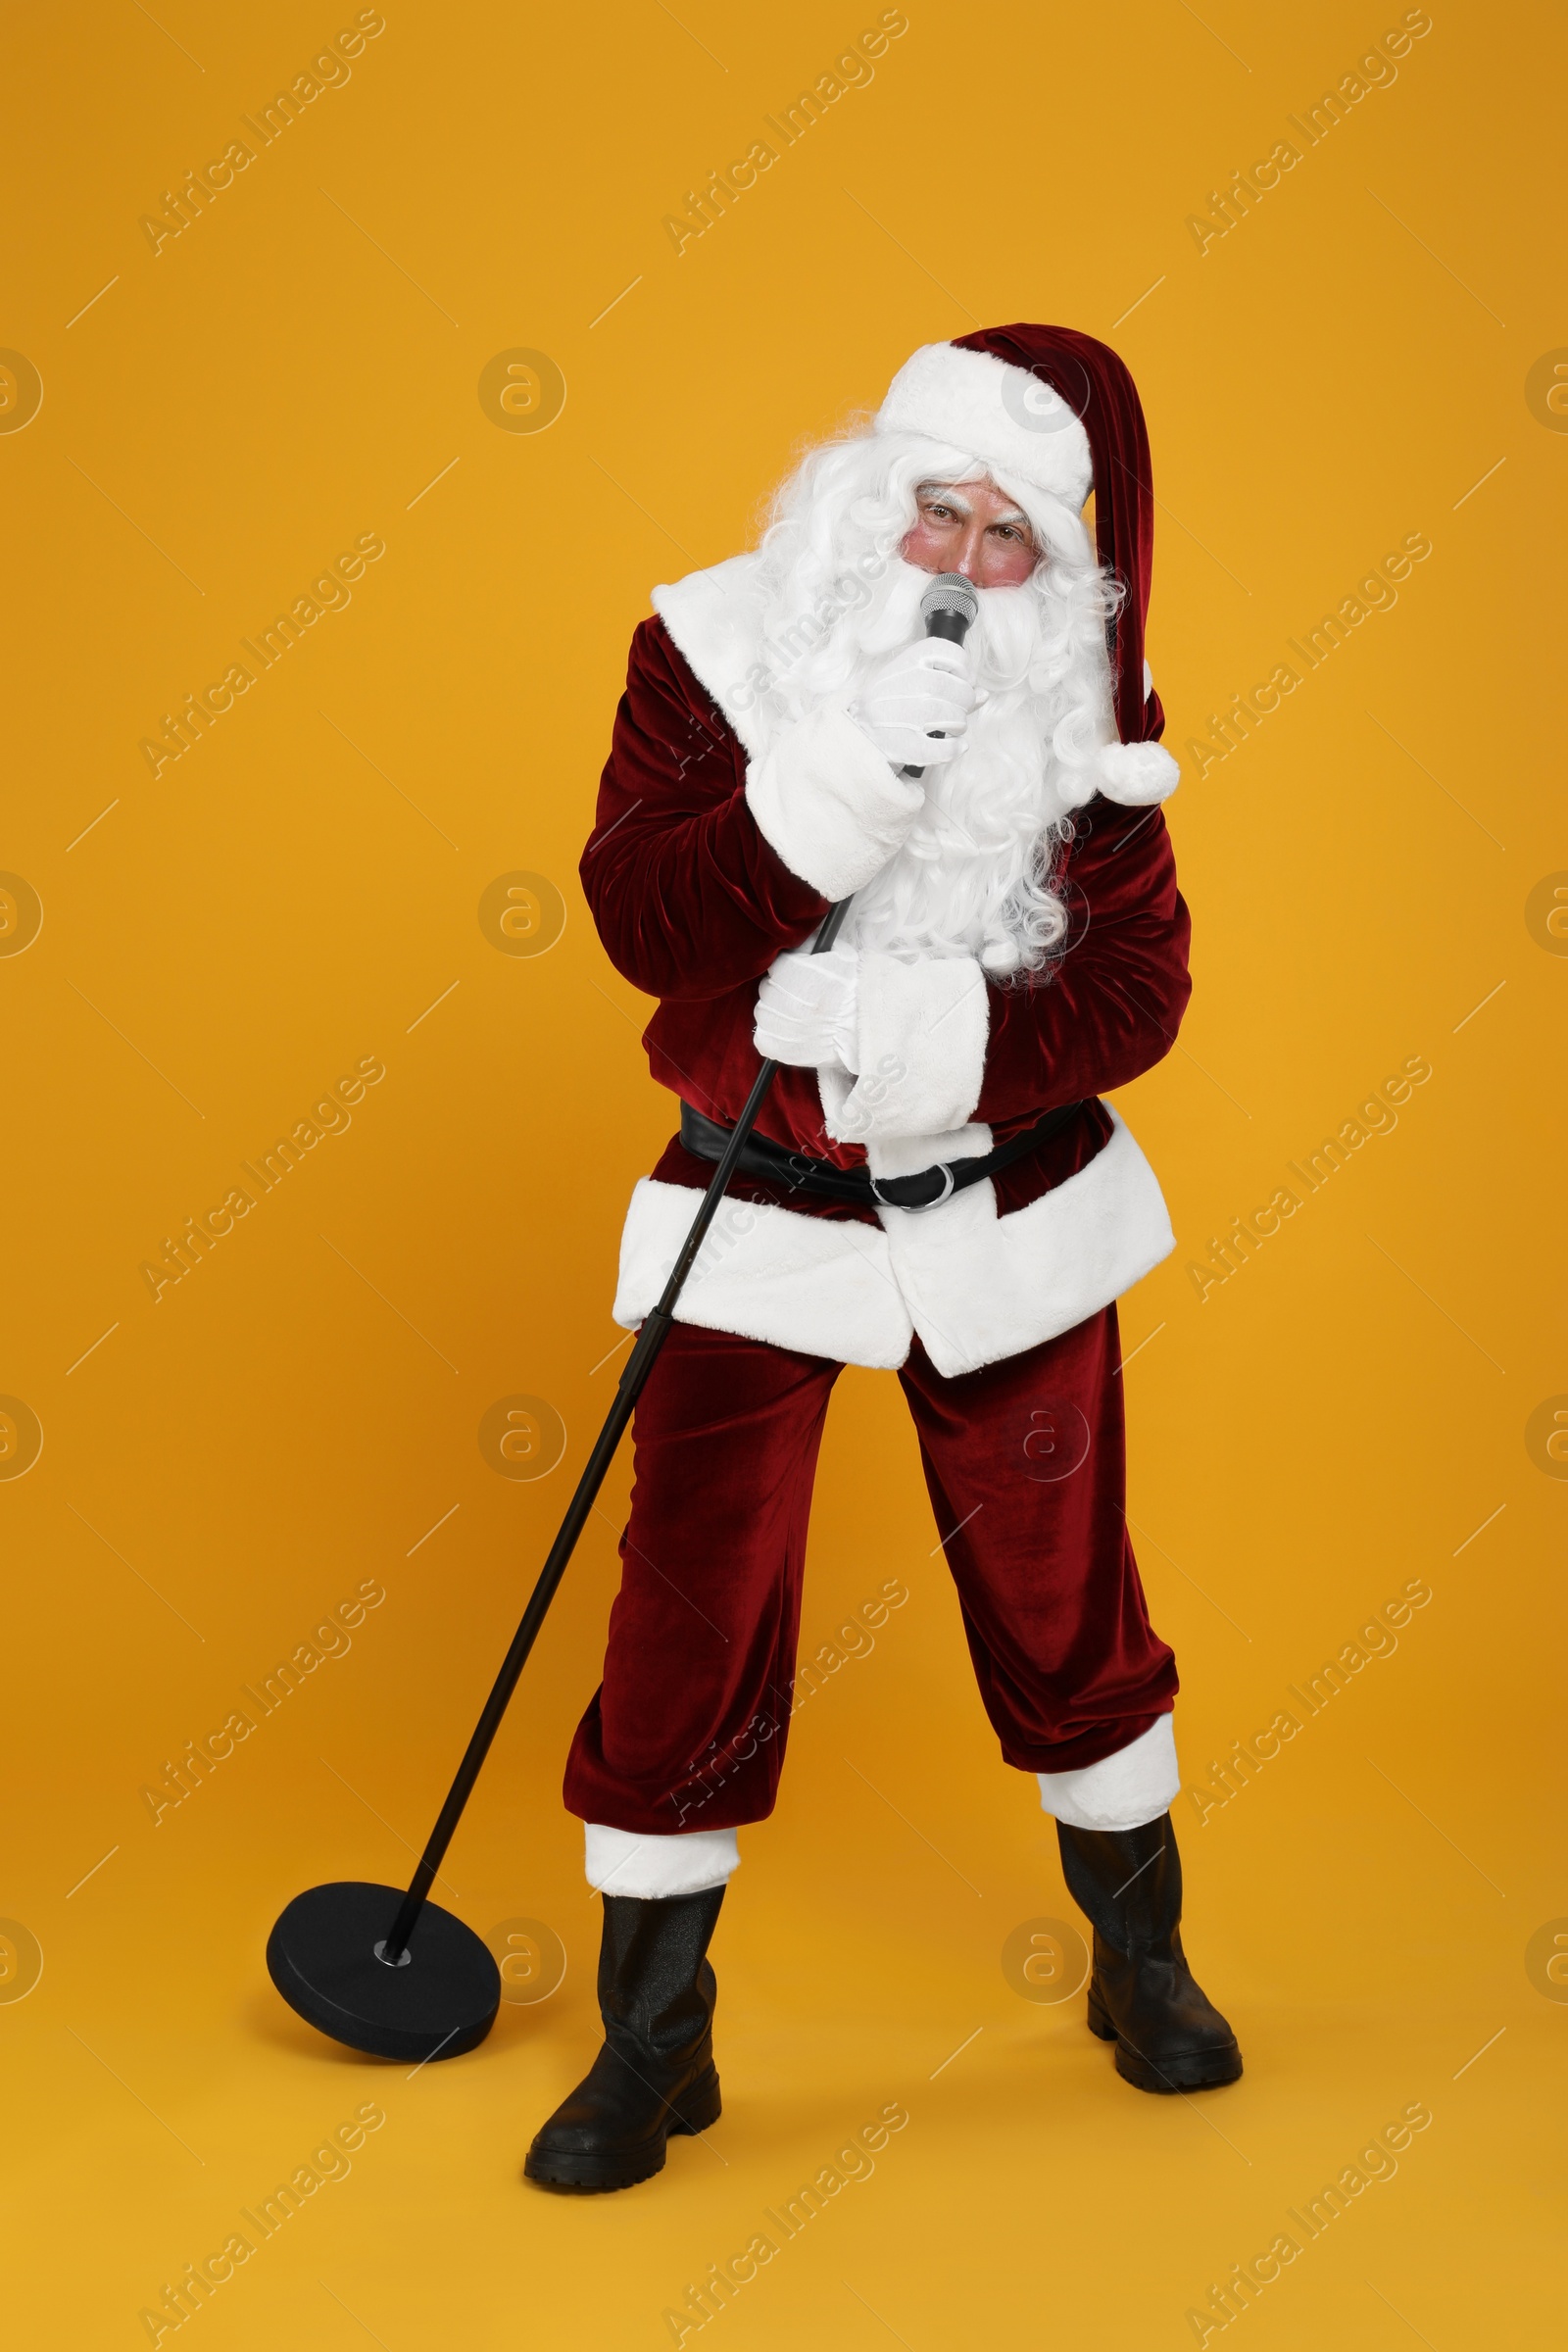 Photo of Santa Claus singing with microphone on yellow background. Christmas music